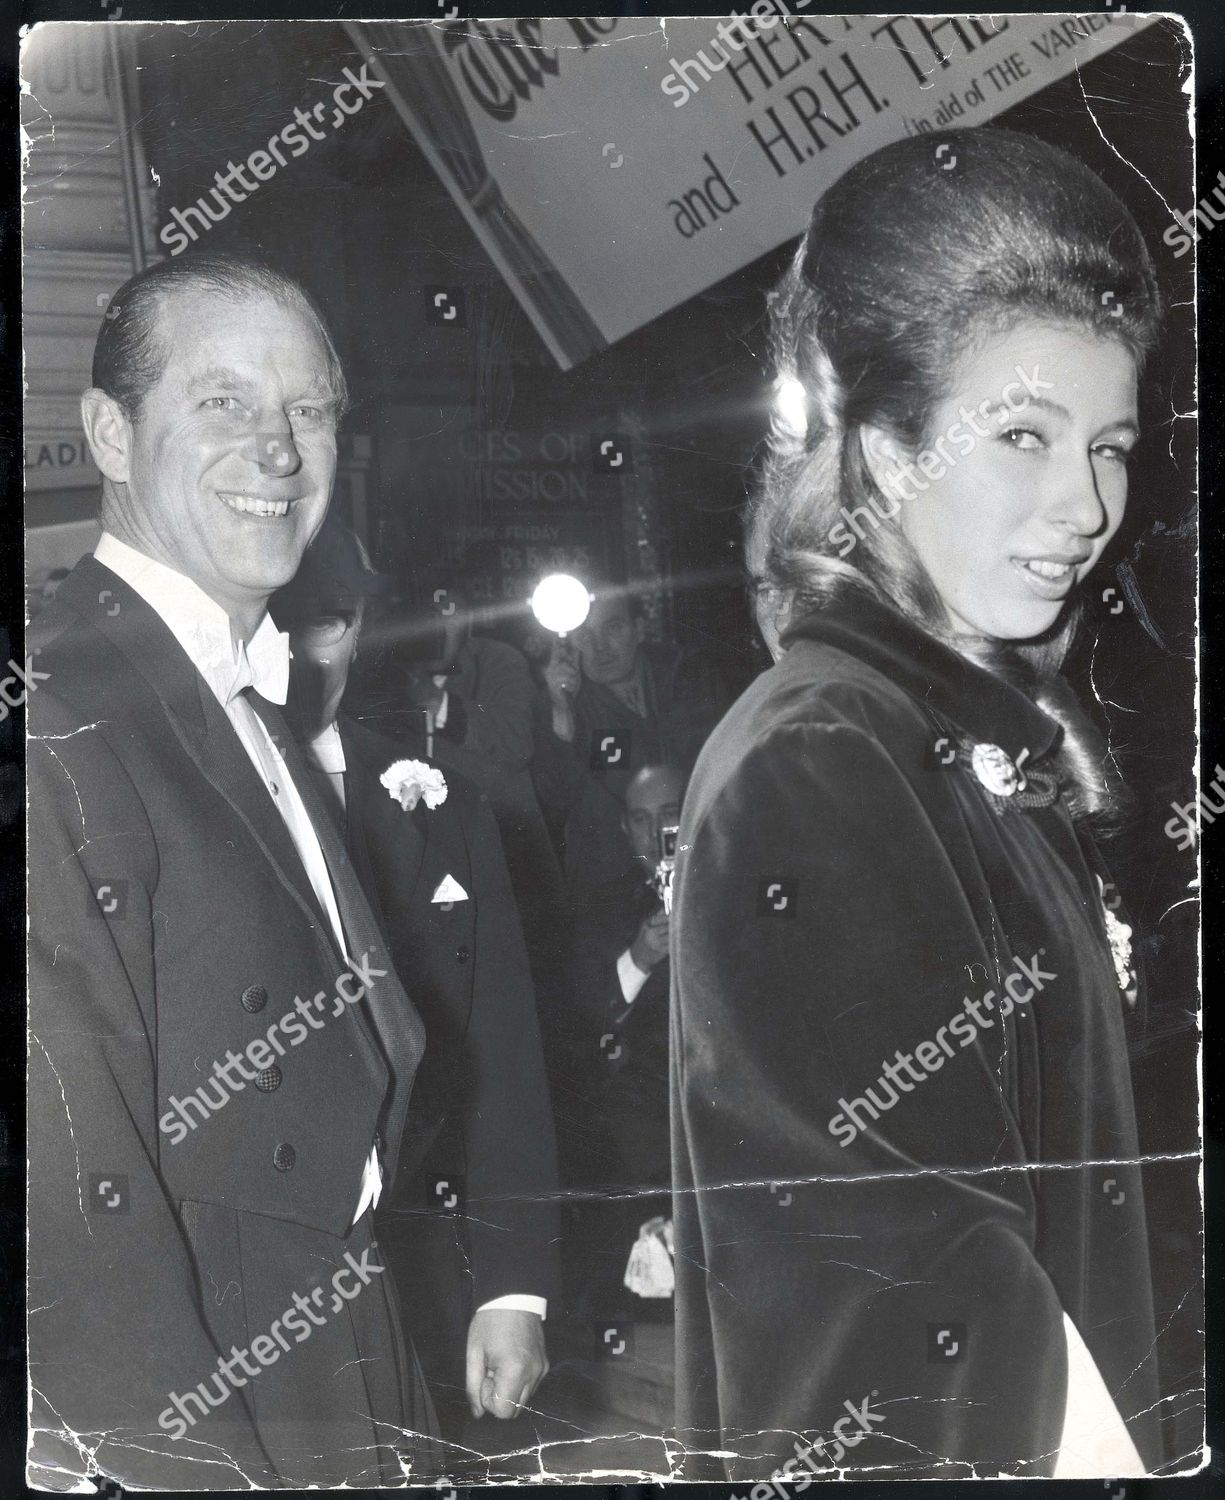 princess-anne-the-princess-royal-and-the-duke-of-edinburgh-prince-philip-being-received-on-arrival-at-the-london-palladium-for-the-royal-variety-performance-to-night-in-aid-of-the-variety-artistes-benevolent-fund-anne-wore-a-full-length-blackvelvet-shutterstock-editorial-894866a.jpg